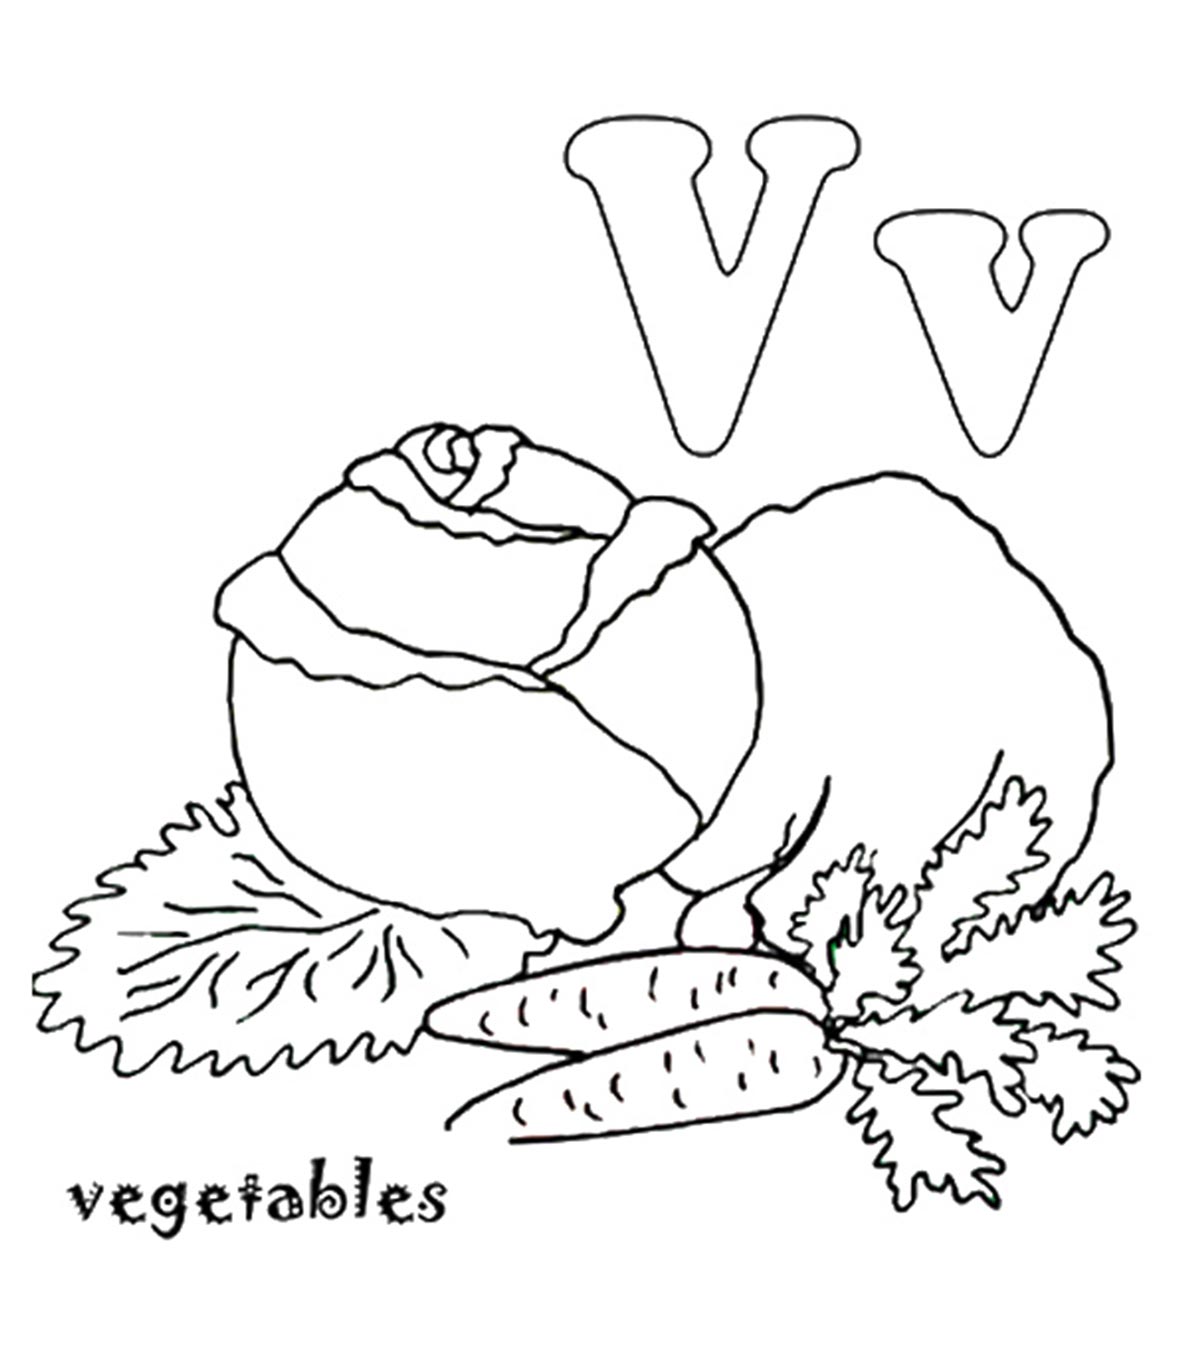 Top 10 Letter ‘V’ Coloring Pages Your Toddler Will Love To Learn & Color